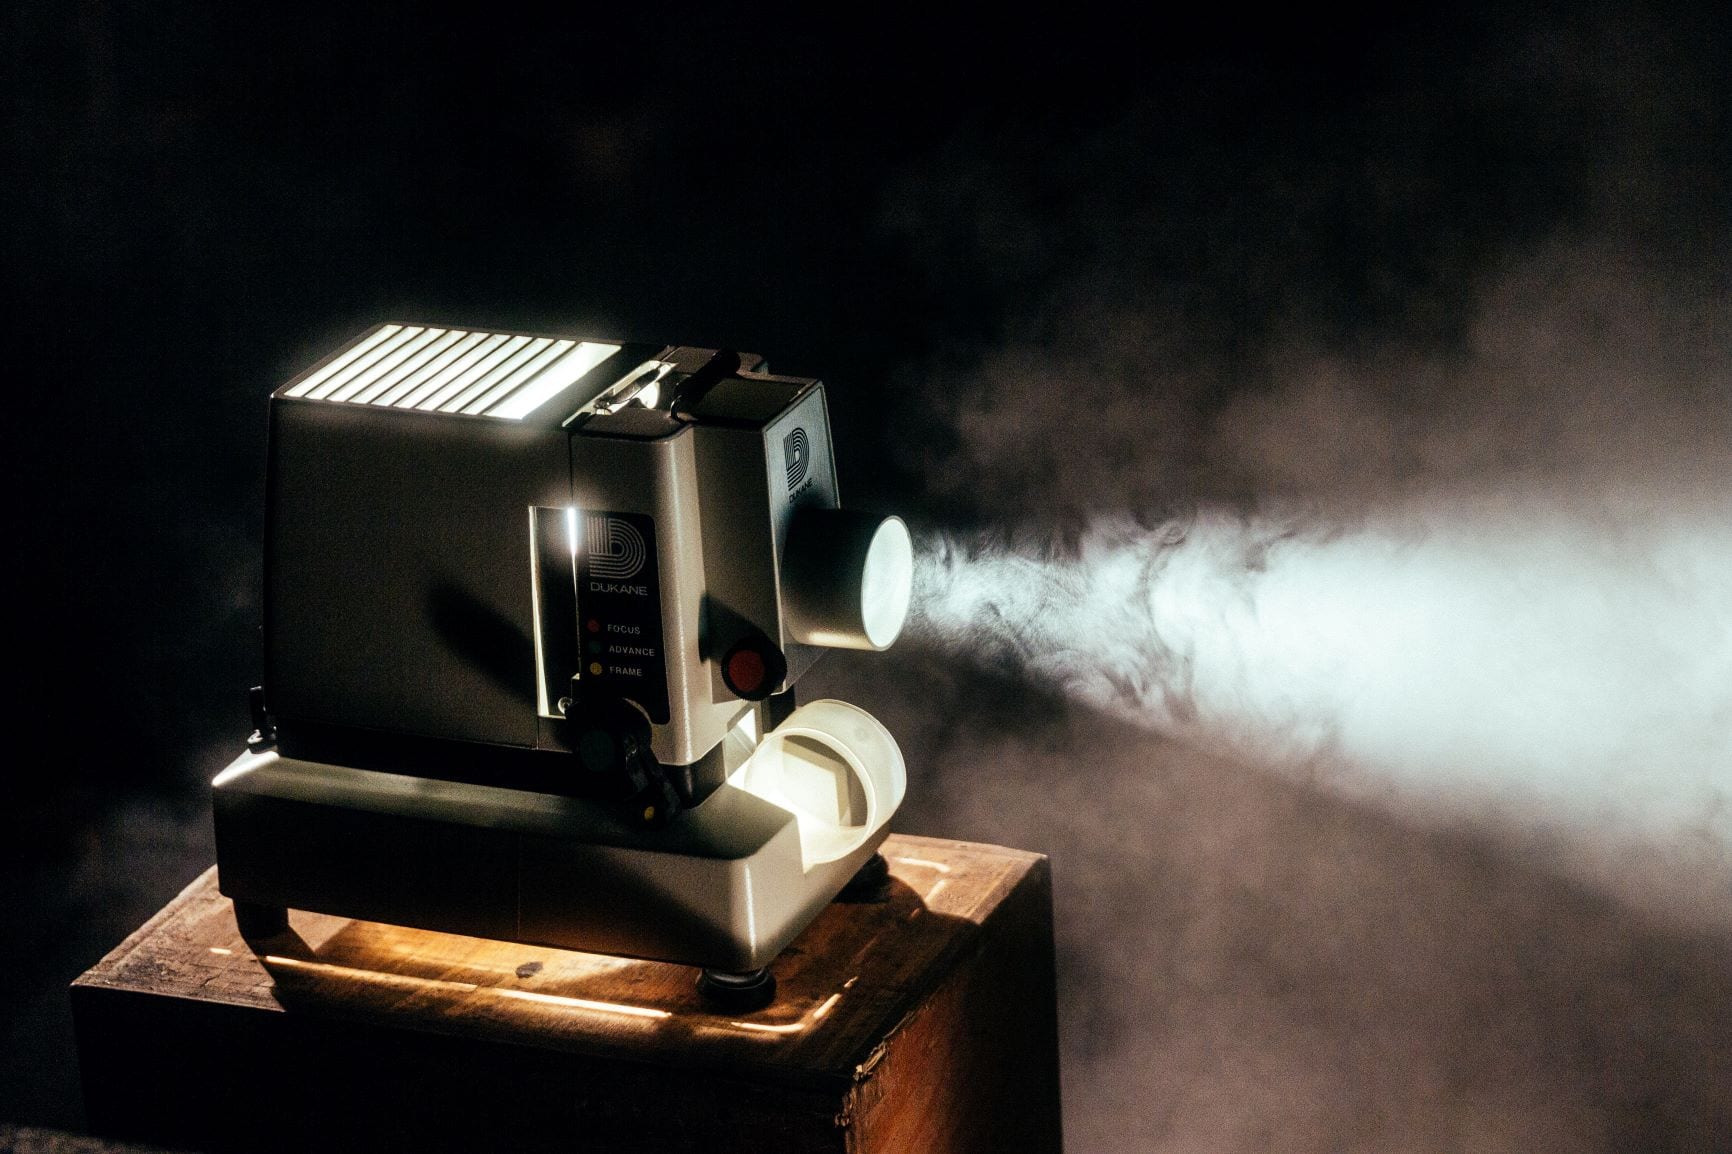 Picture of a vintage projector courtesy of Jeremy Yap on Unsplash for Notorious